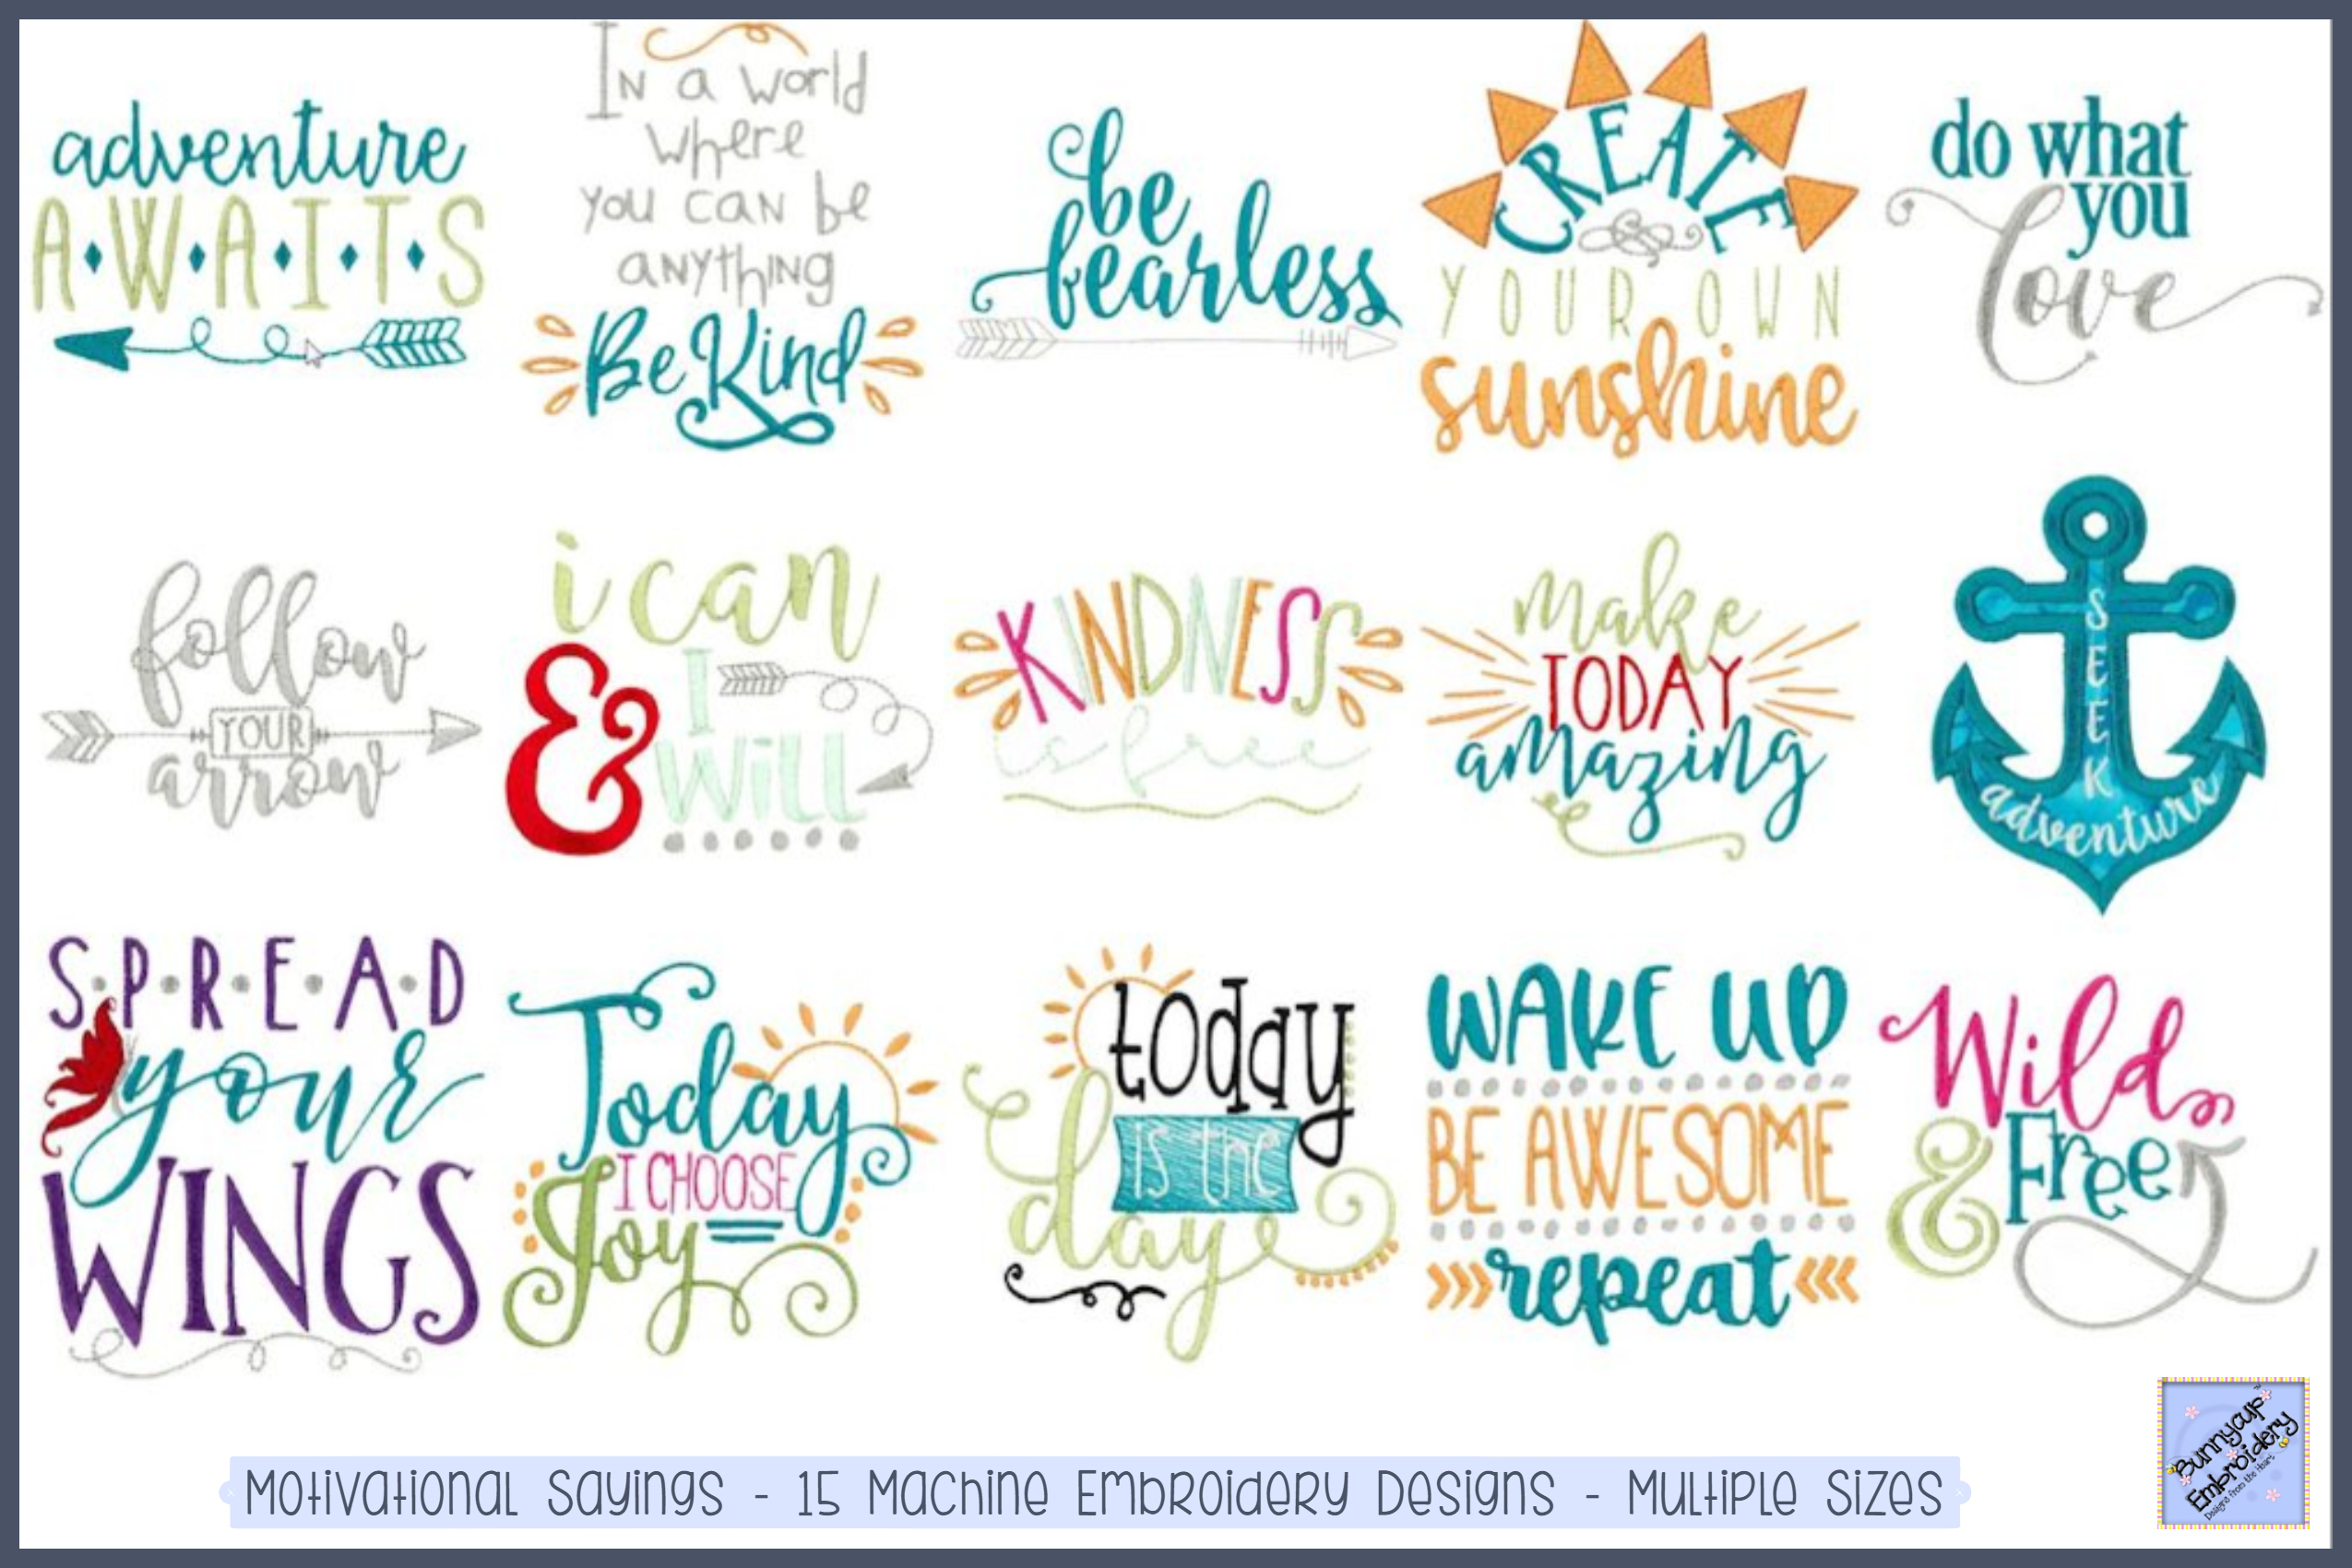 Motivational Sayings - 12 Embroidery Designs (279802) | Designs